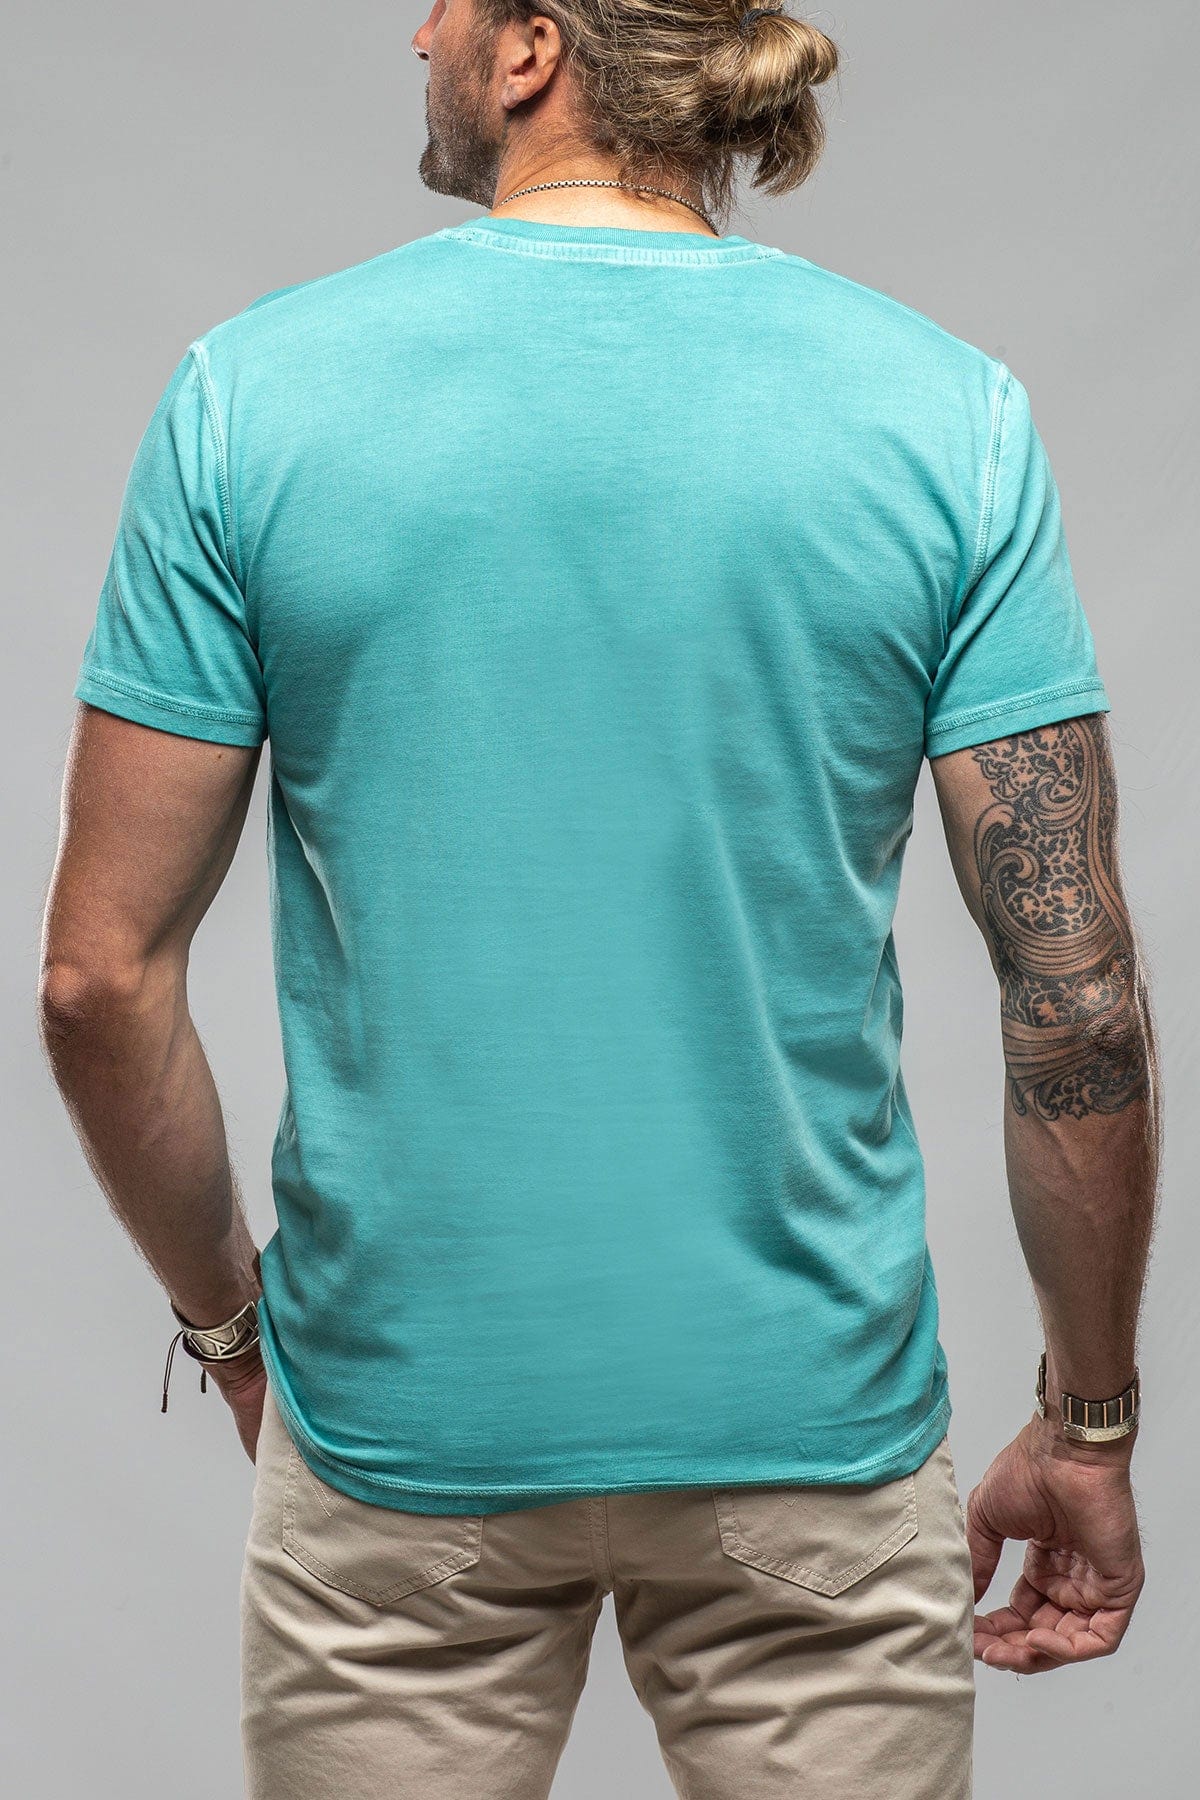 Mendocino Cotton SS Henley in Mint - AXEL'S